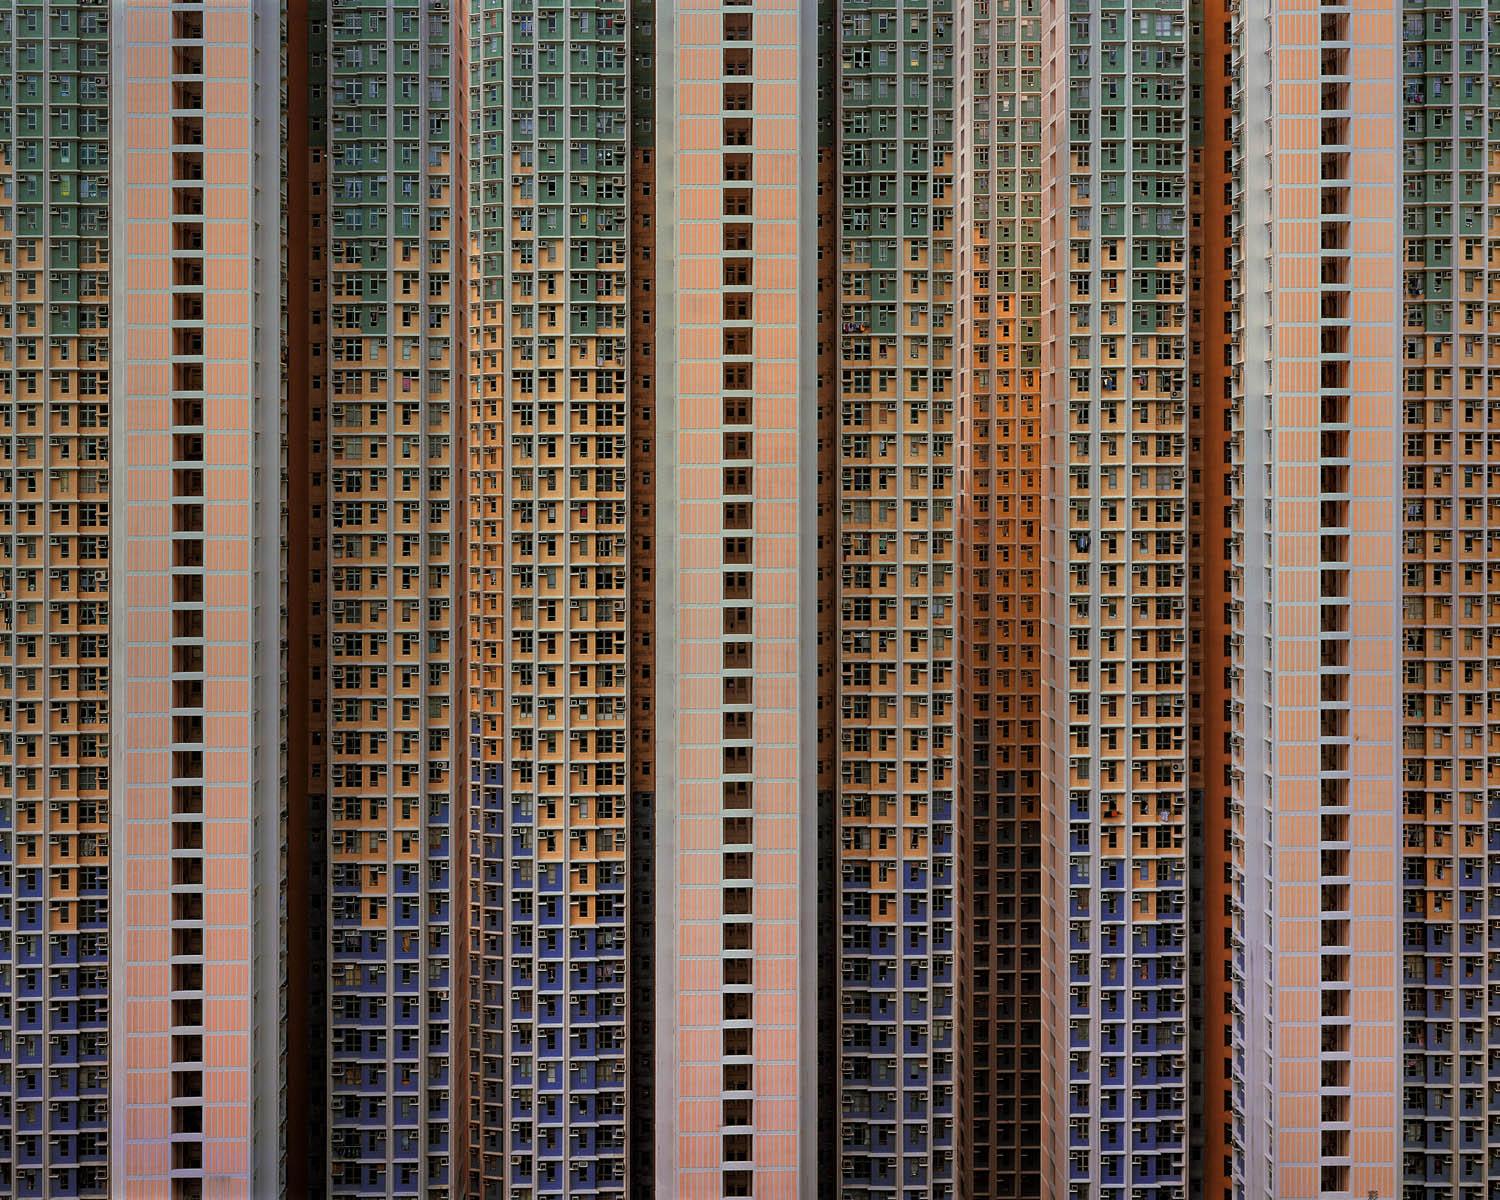 michael wolf architecture of density